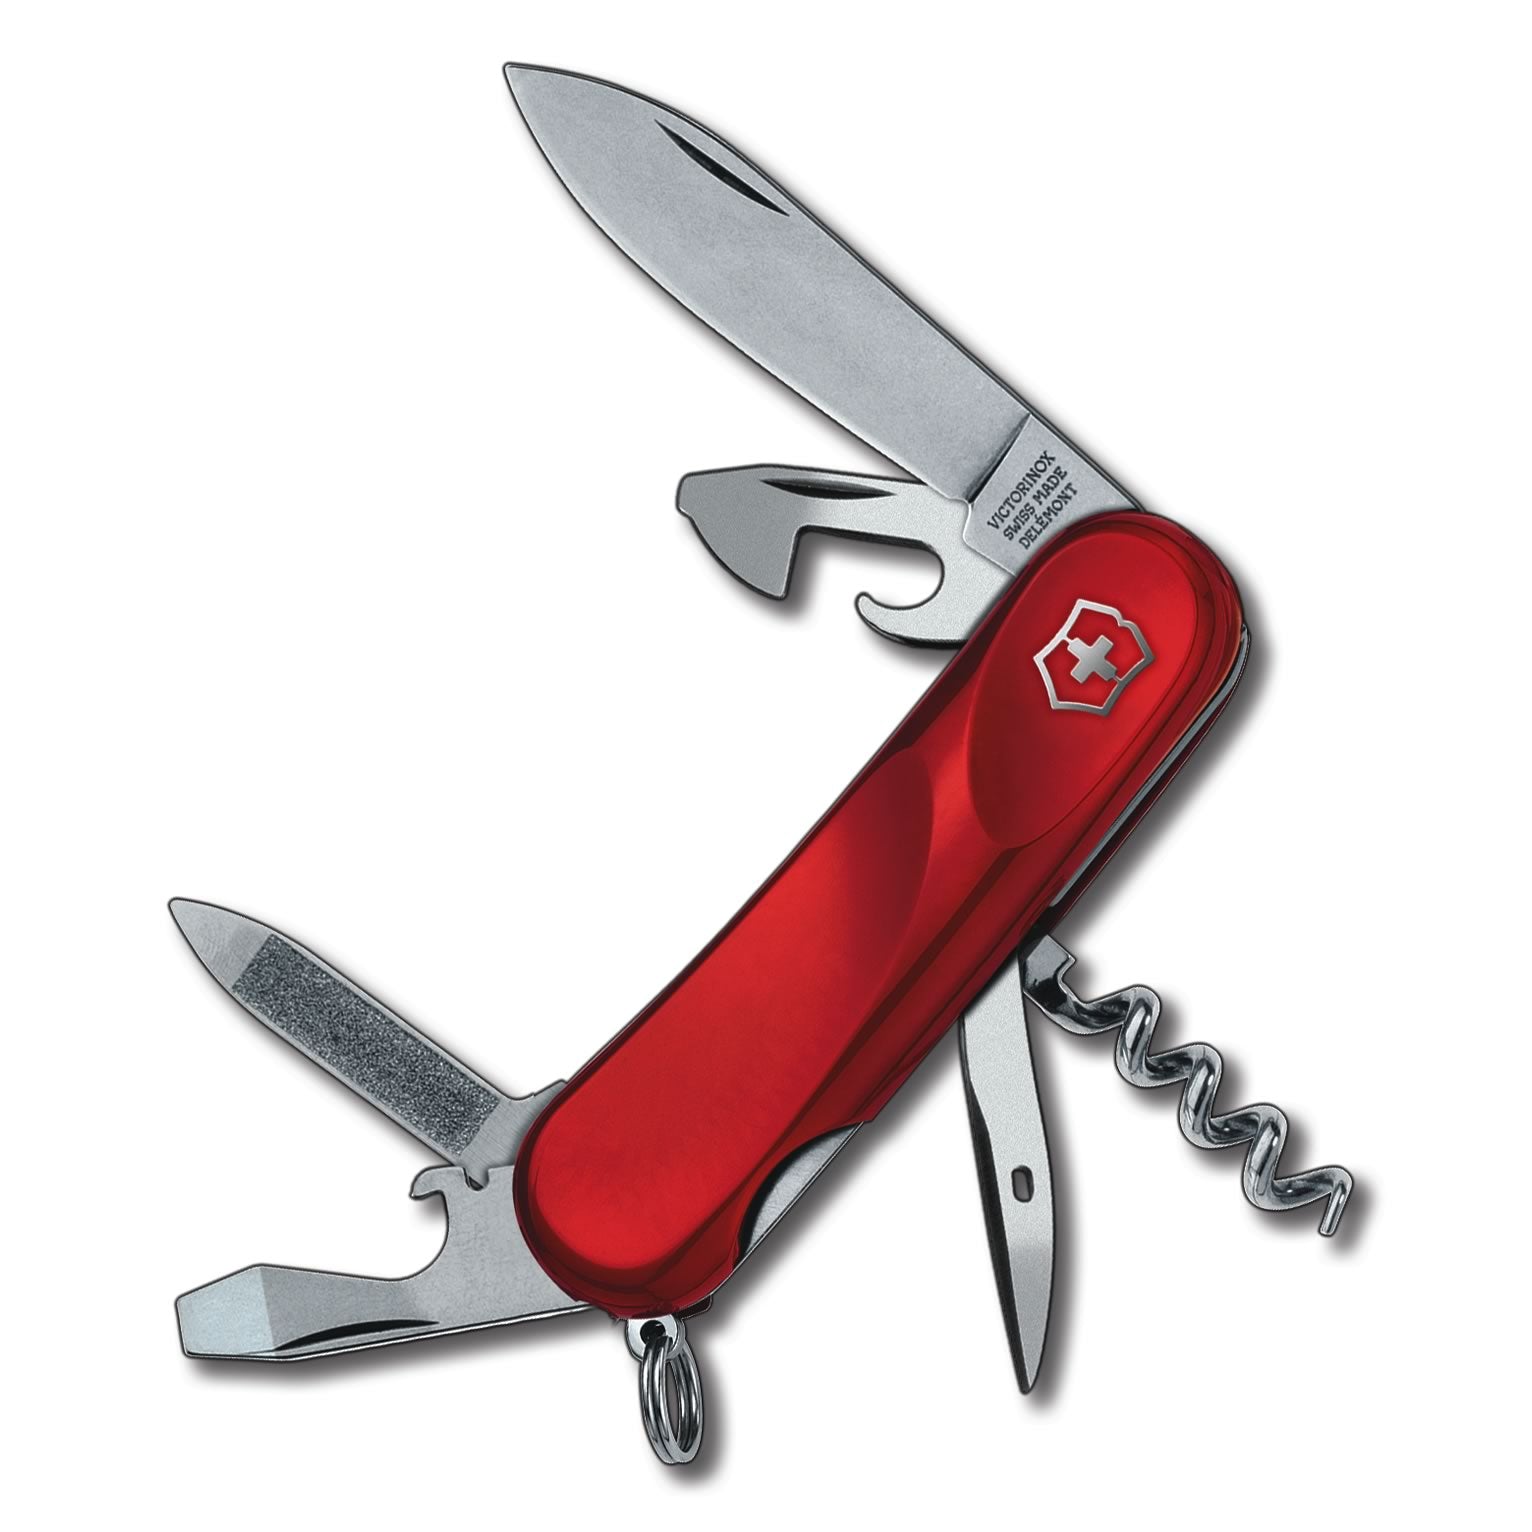 Left-Handed Swiss Army Knife - The Evolution